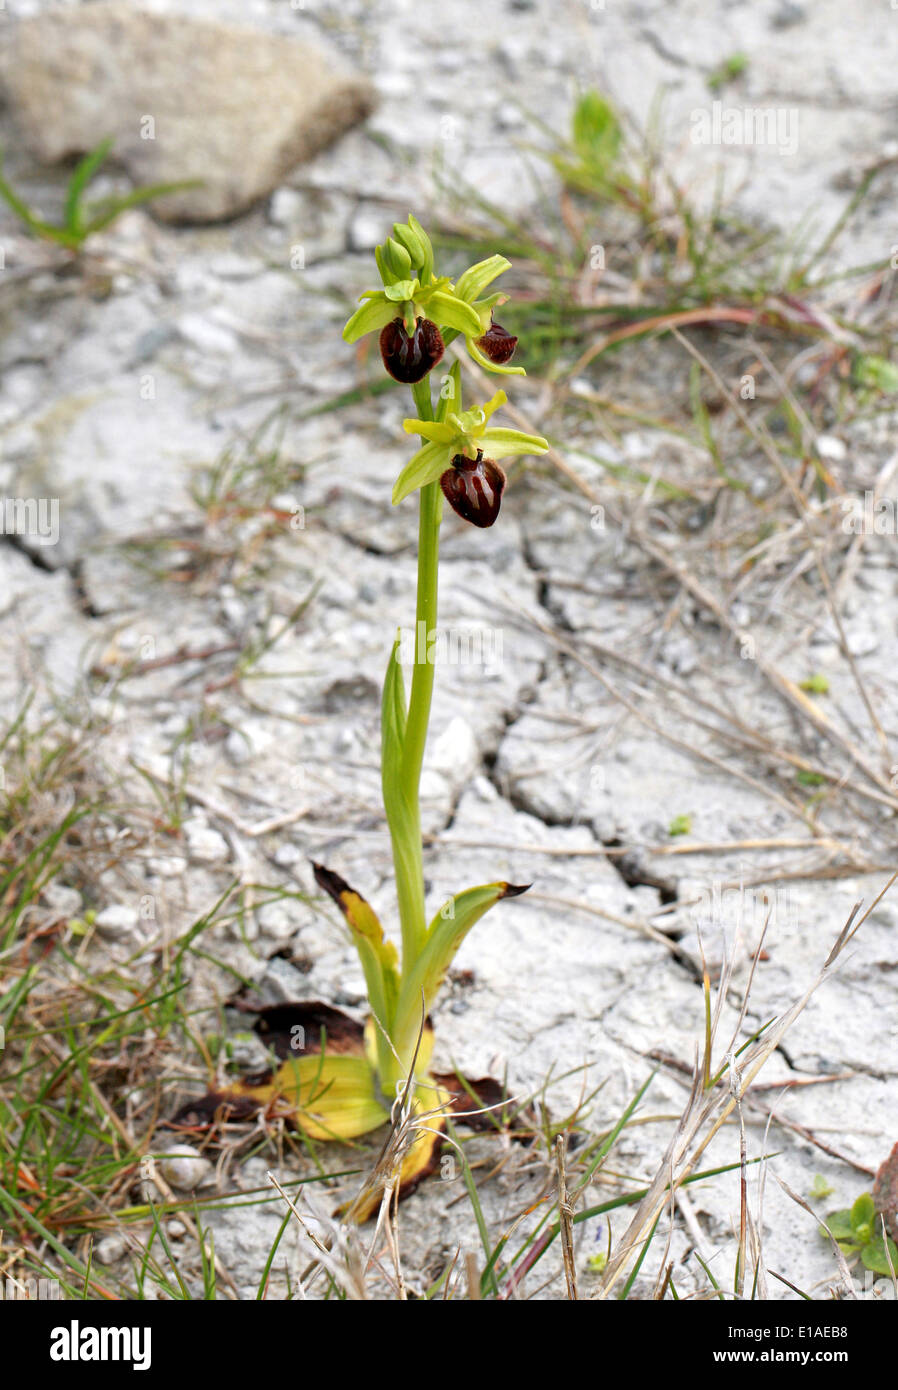 Early Spider Orchids, Ophrys sphegodes, Orchidaceae. Samphire Hoe, Kent. British Wild Flower, UK. Stock Photo